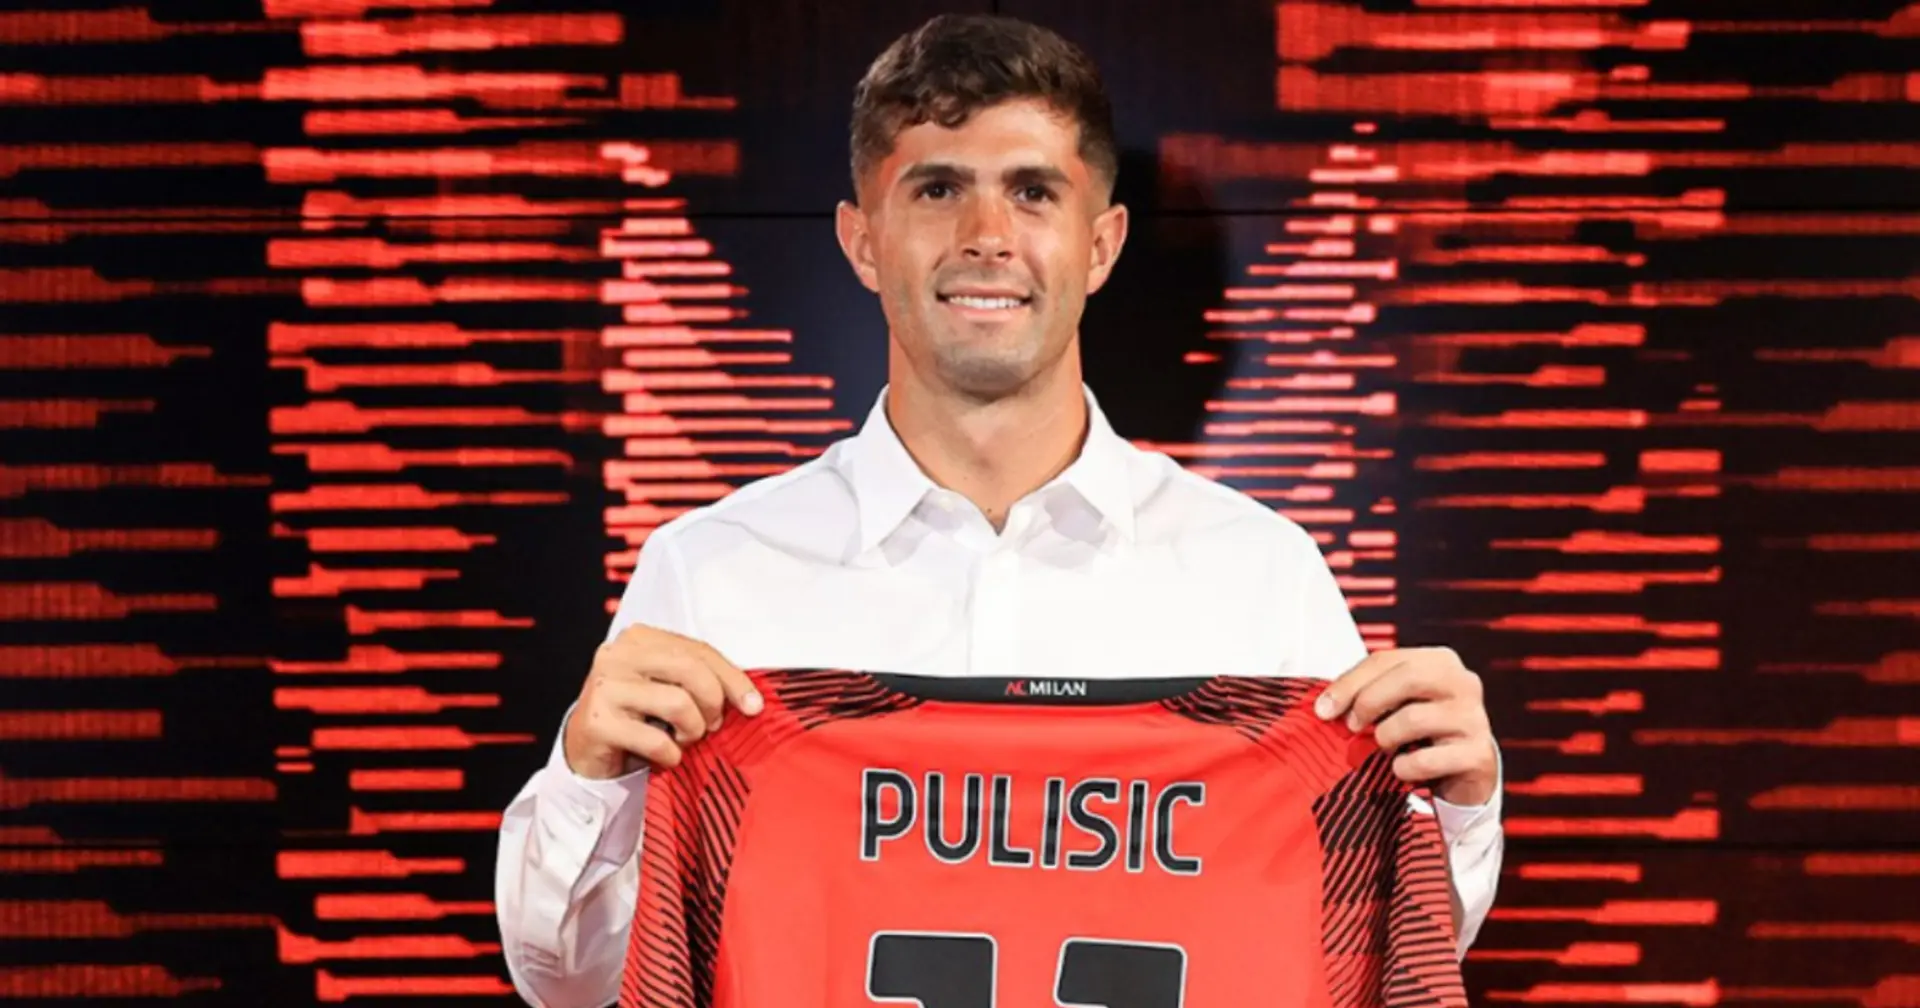 Pulisic leaves Chelsea & 2 more big stories you might've missed